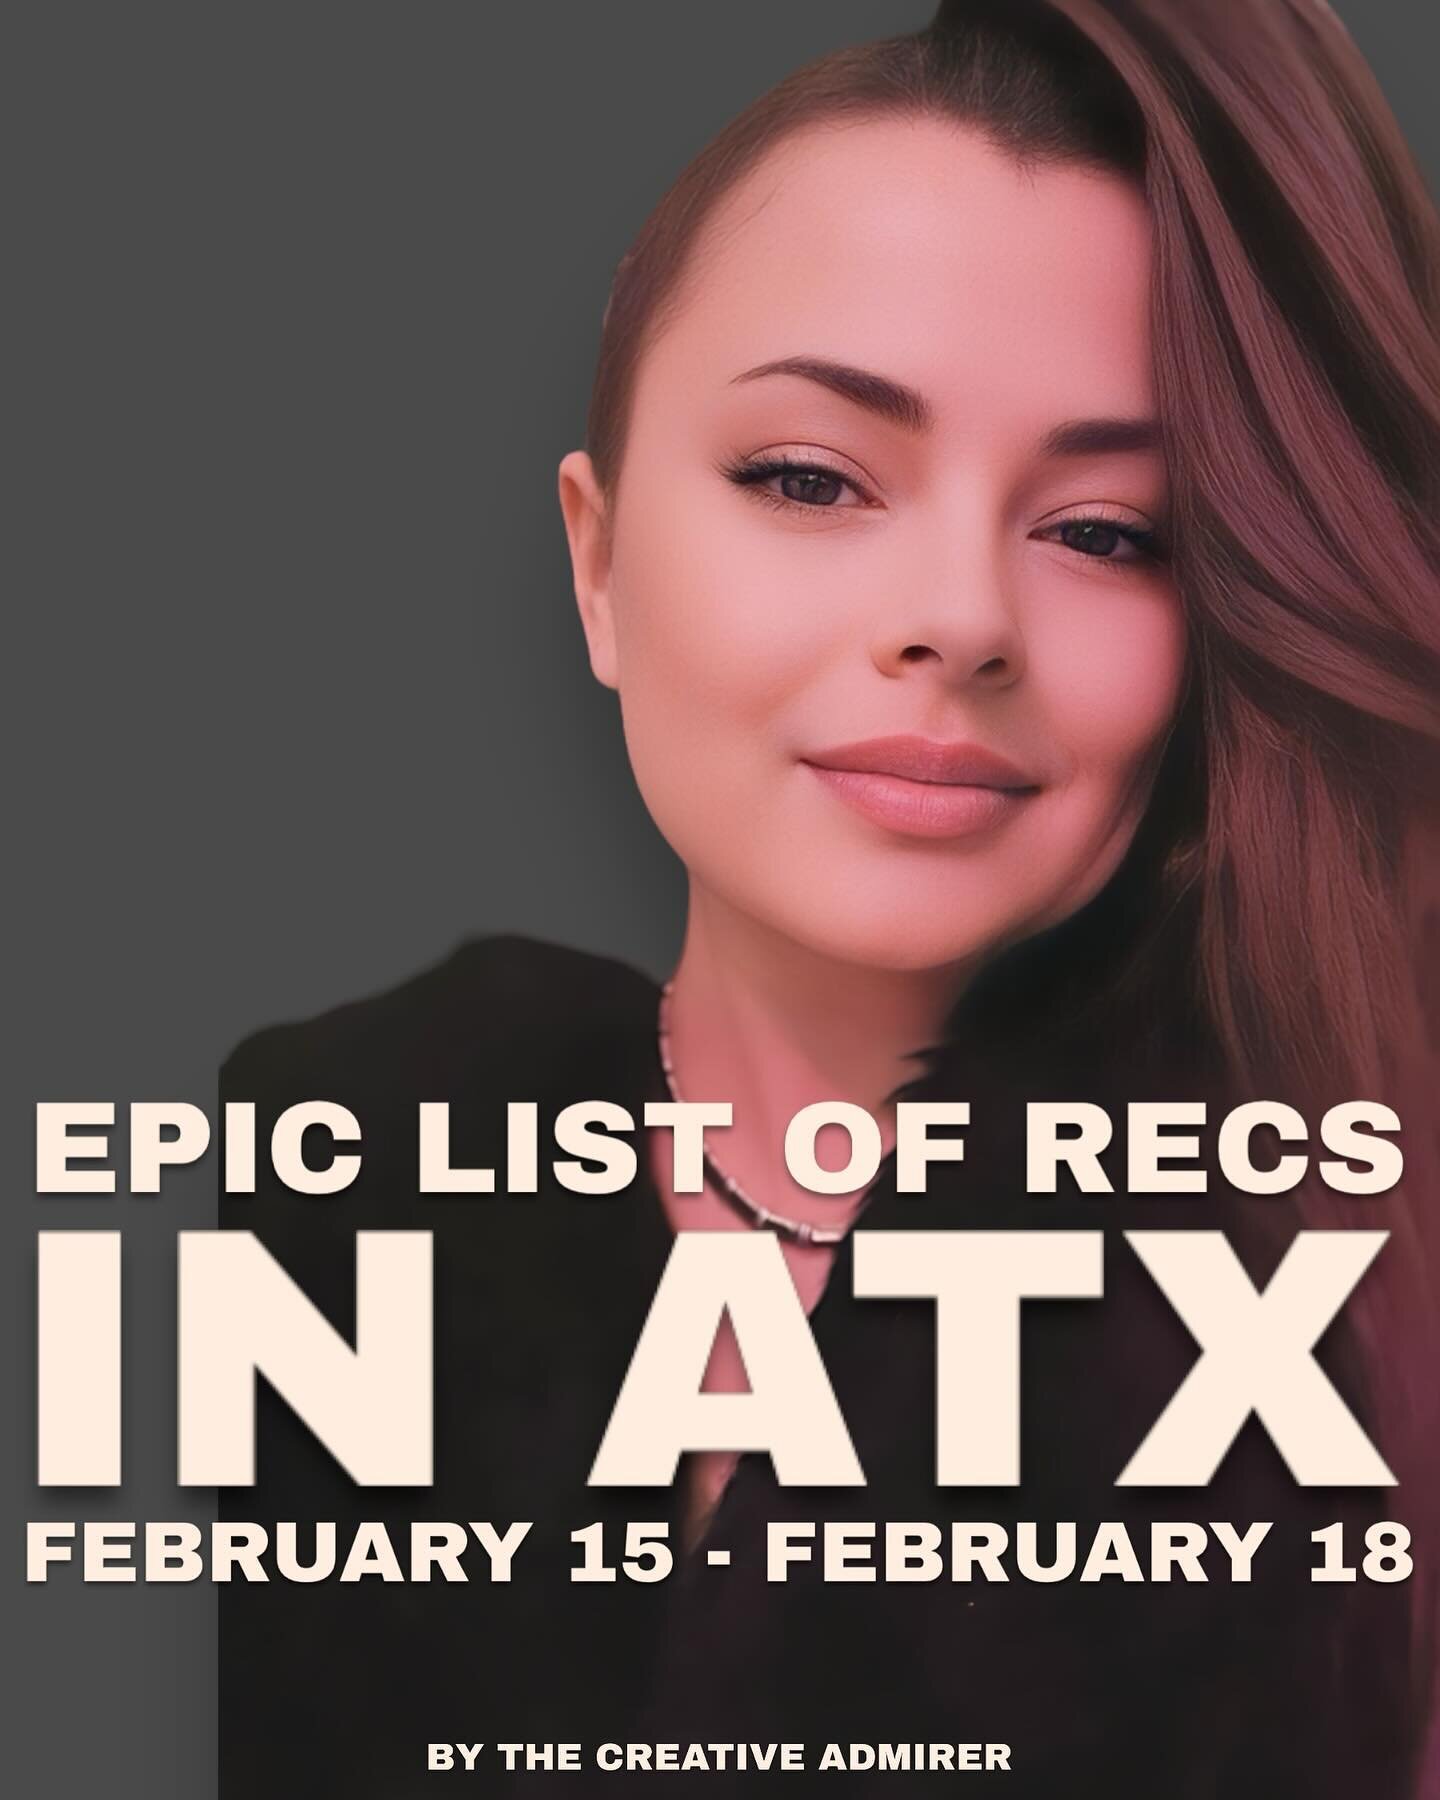 EPIC LIST OF ATX RECS 🙌 Thursday, February 15 - Sunday, February 18
&nbsp;
🐝 Your girl has been a busy beeee ALMOST as busy as this weekend&rsquo;s schedule!

Idk what the deal is with this weekend but it is STACKED! 💃

👁️ Lmk what&rsquo;s catchi